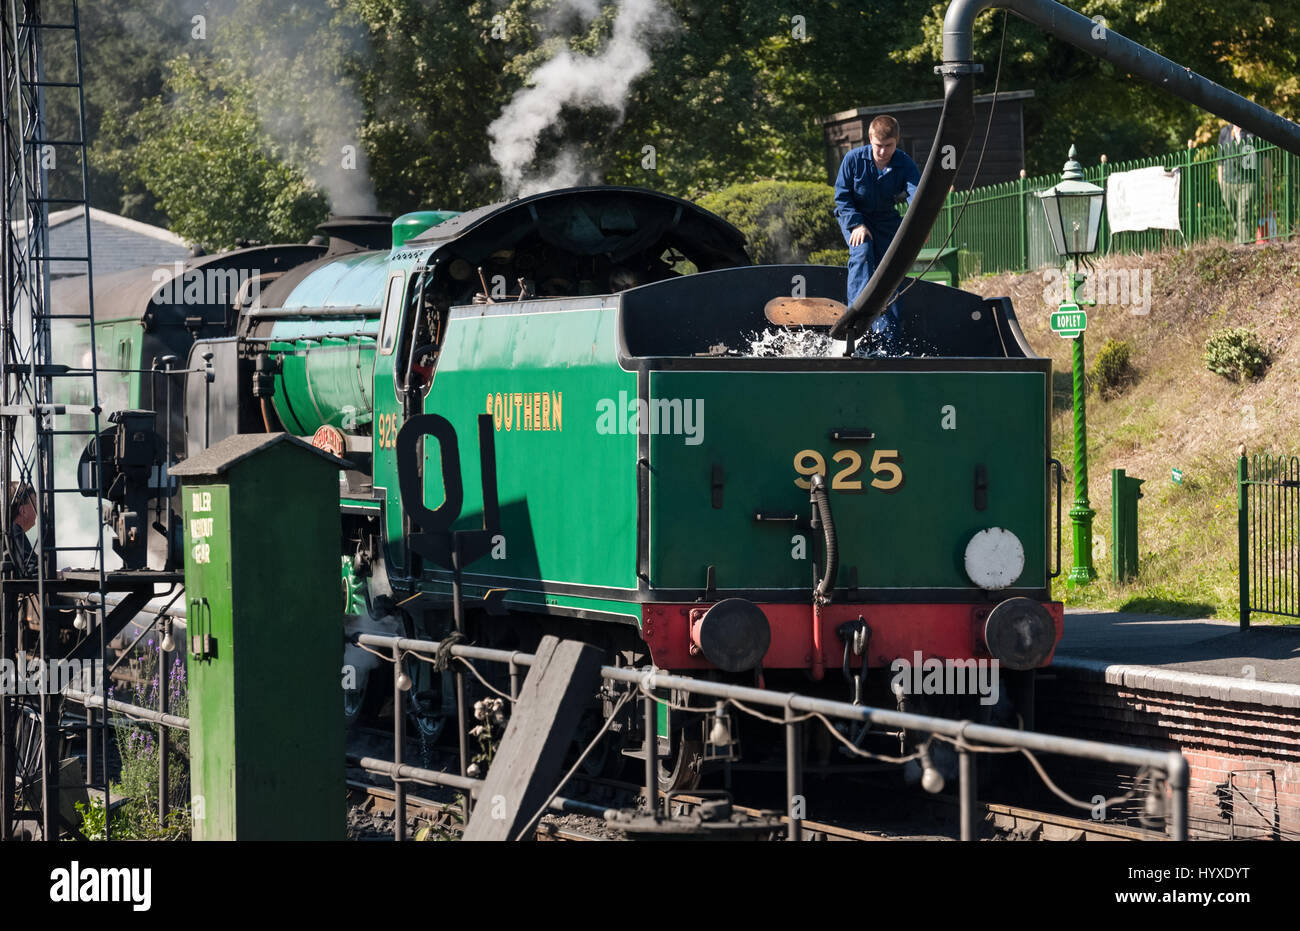 Ropley, UK - 19 September, 2015: An engineer filling the water tender of a vintage steam locomotive at the Mid-Hants Watercress railway station of Rop Stock Photo